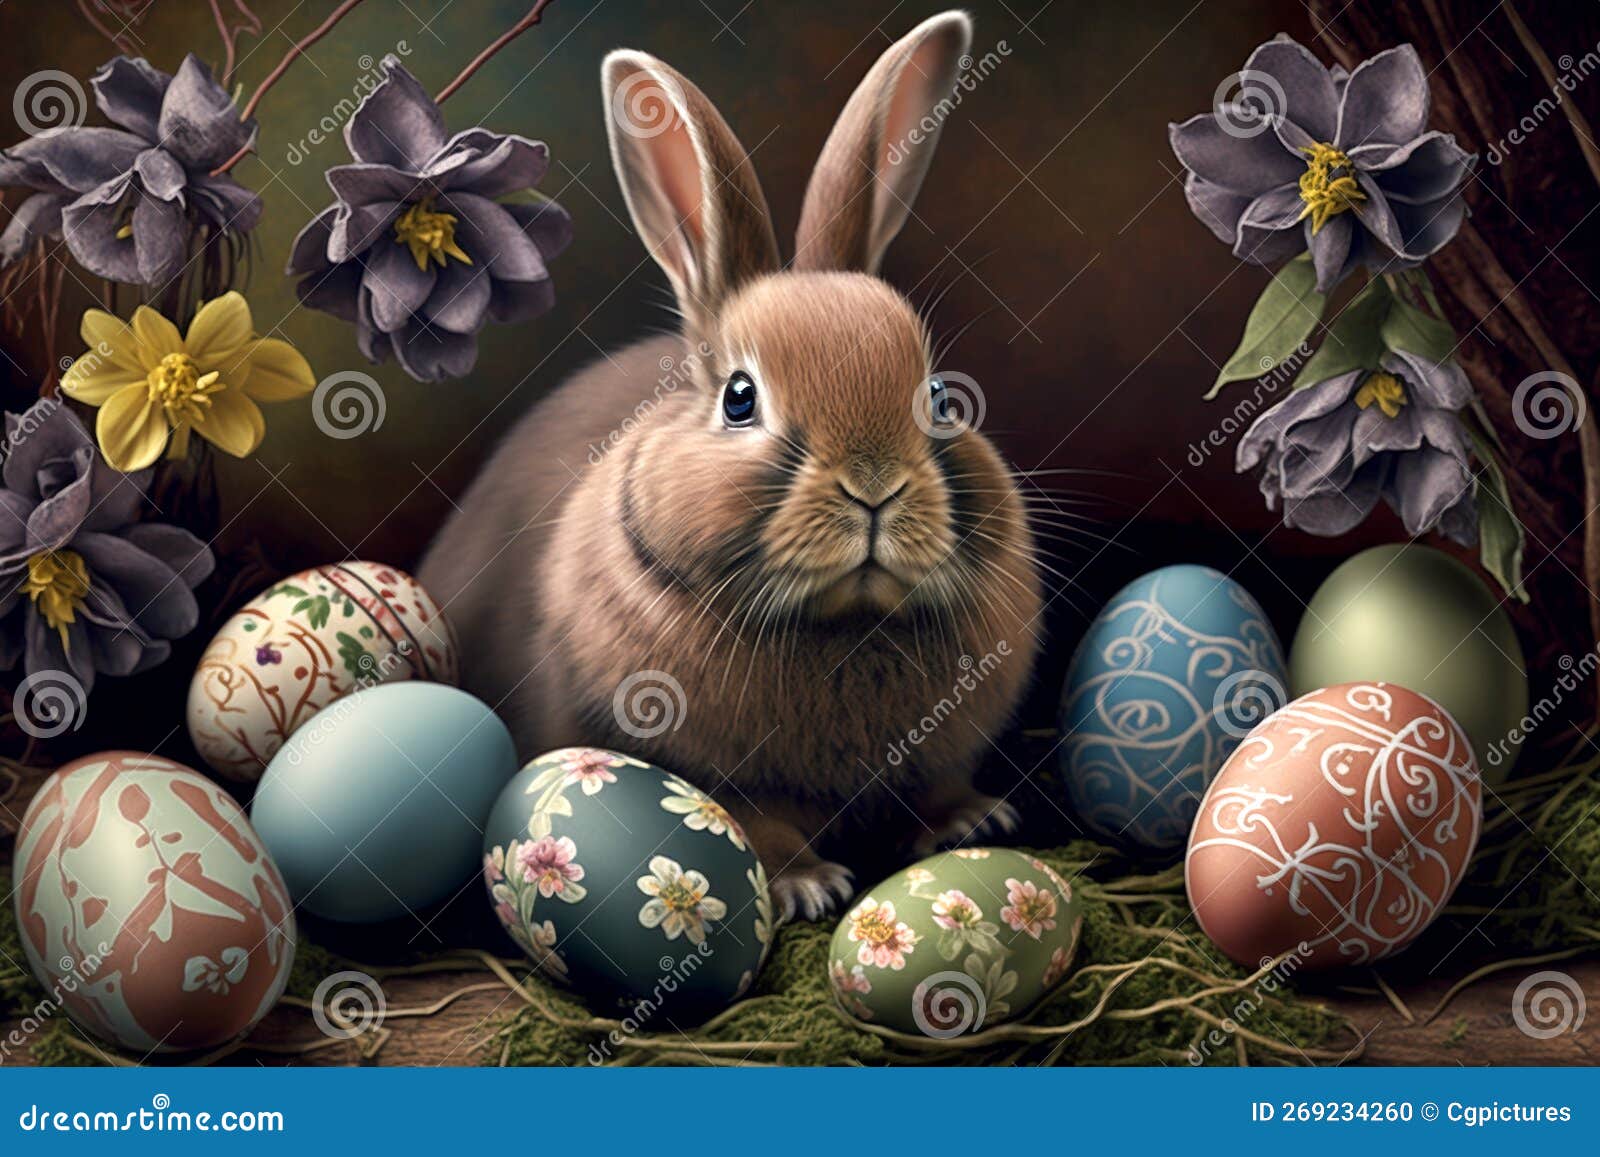 Vintage Picture with Easter Bunny Surrounded by Easter Eggs and Flowers ...